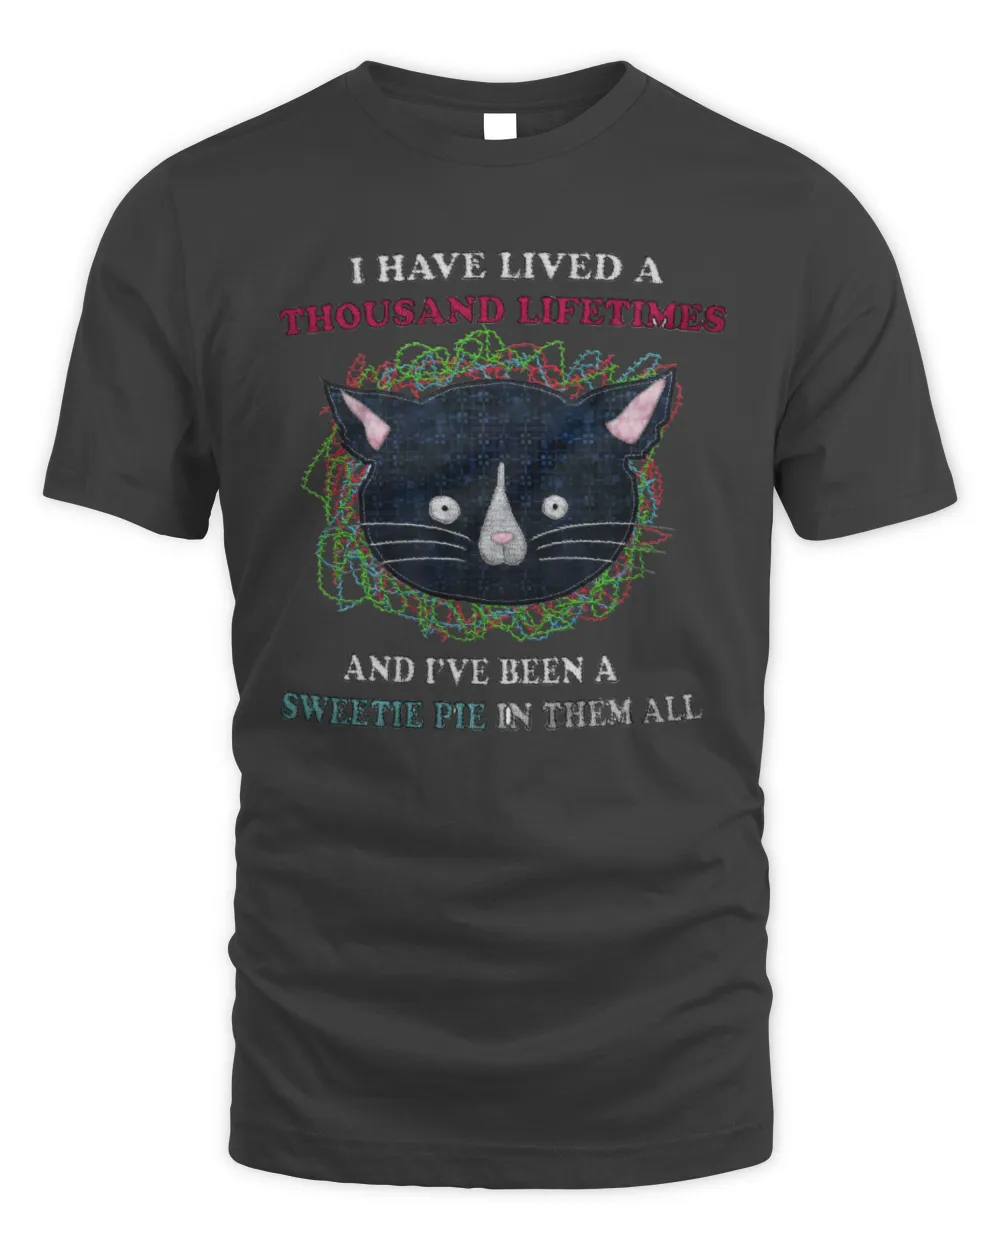 A Thousand Lifetimes Unisex T-shirt (Not embroidered)